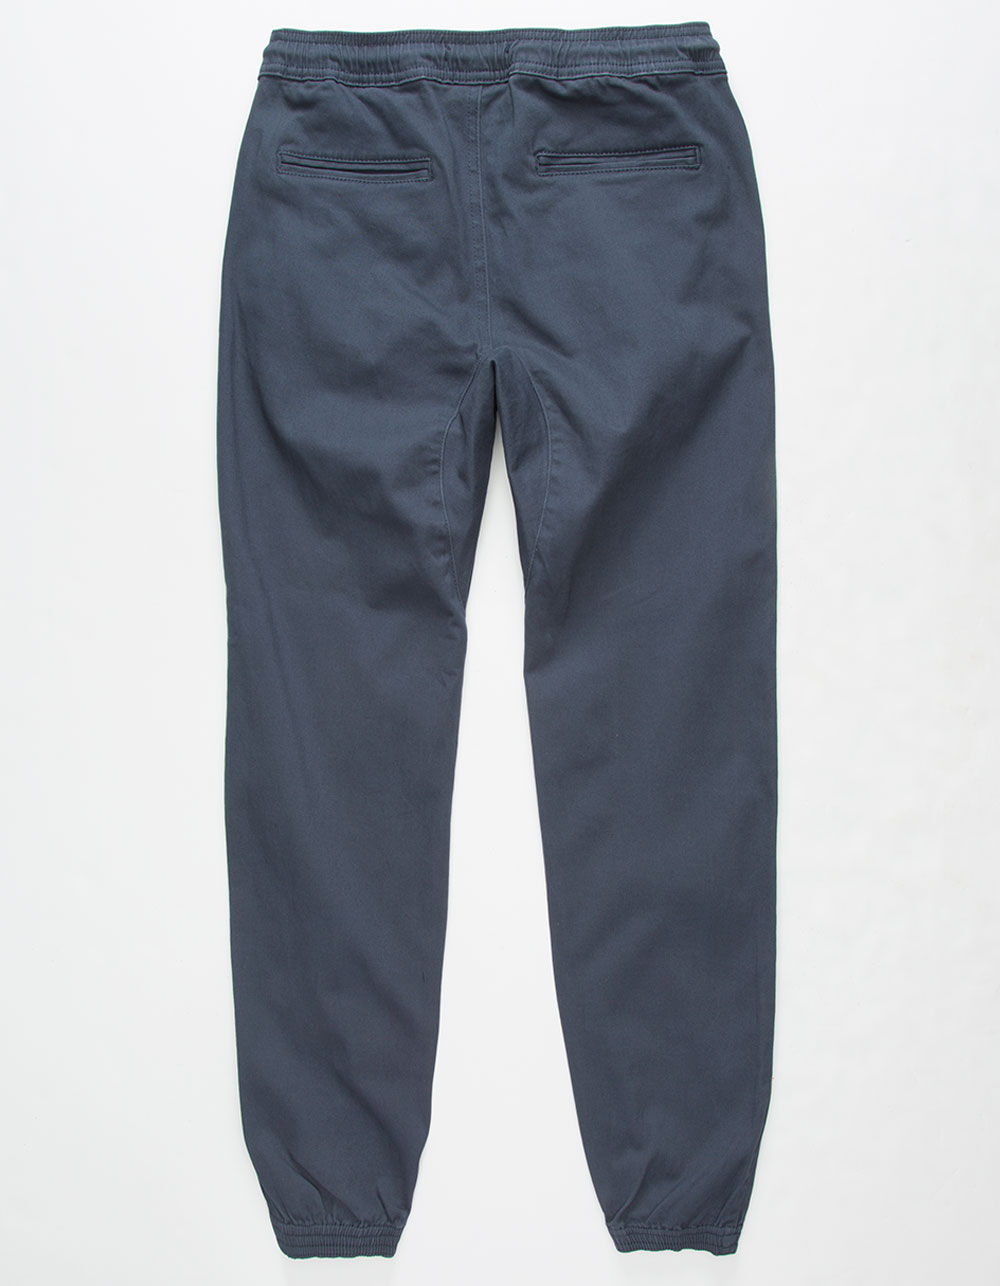 CHARLES AND A HALF Boys Twill Jogger Pants - NAVY | Tillys